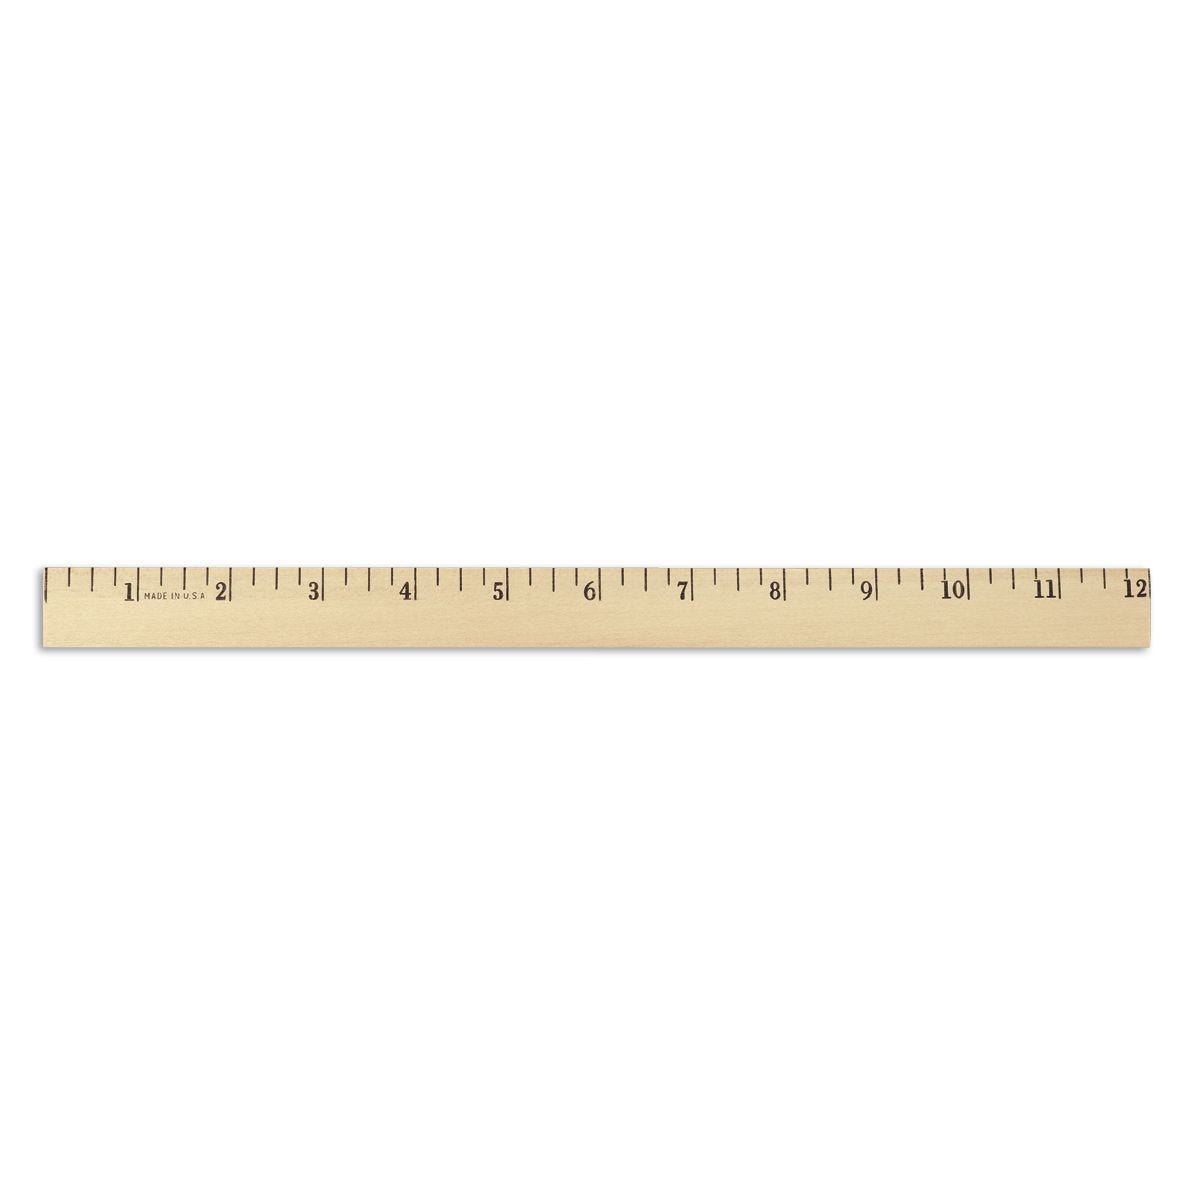 Find It Marble Flexible Magnetic Ruler - Shop Tools & Equipment at